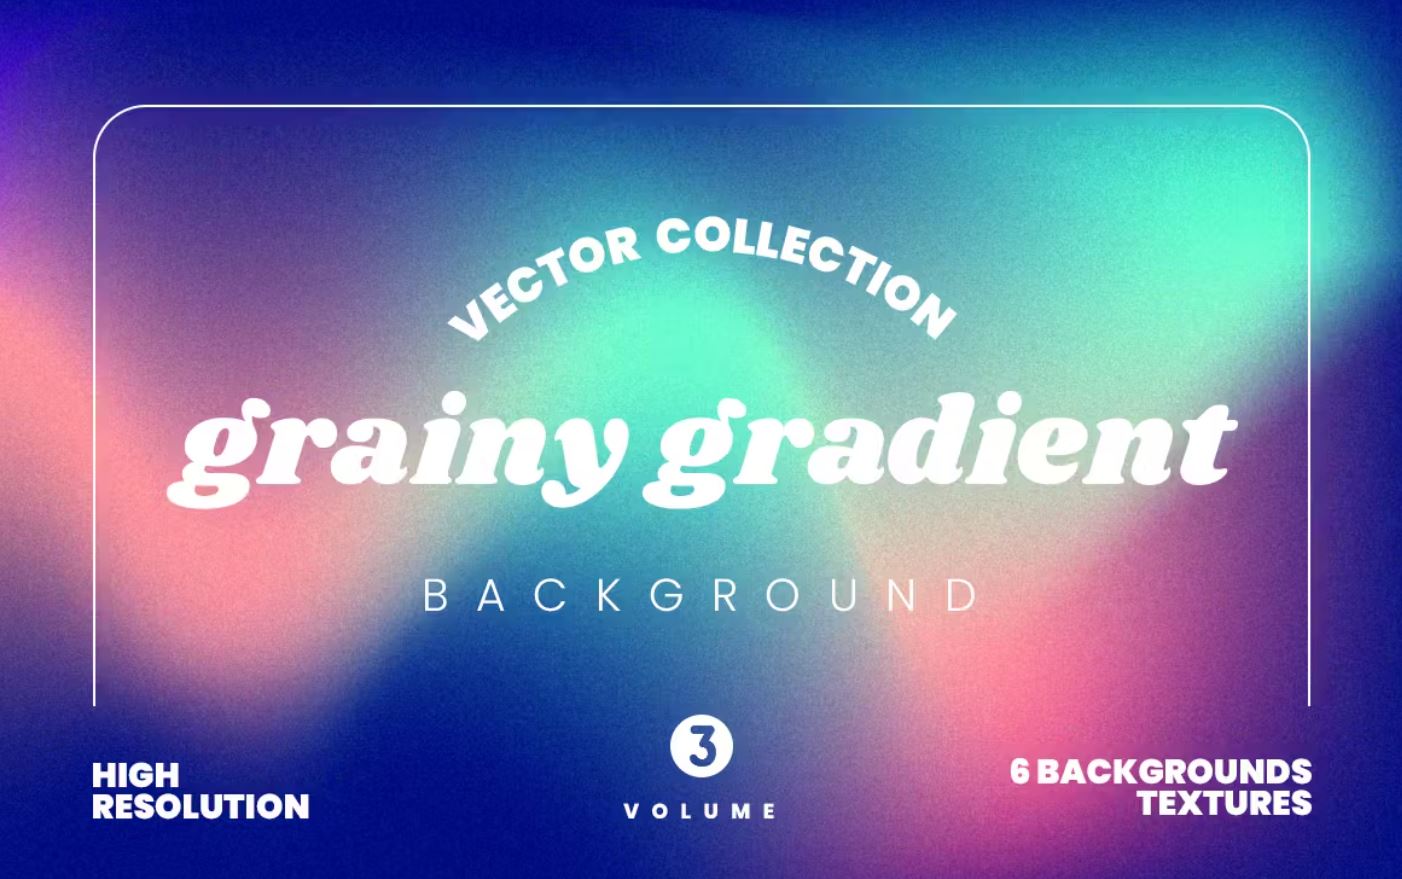 Faded gainy gradient vector backgrounds and textures